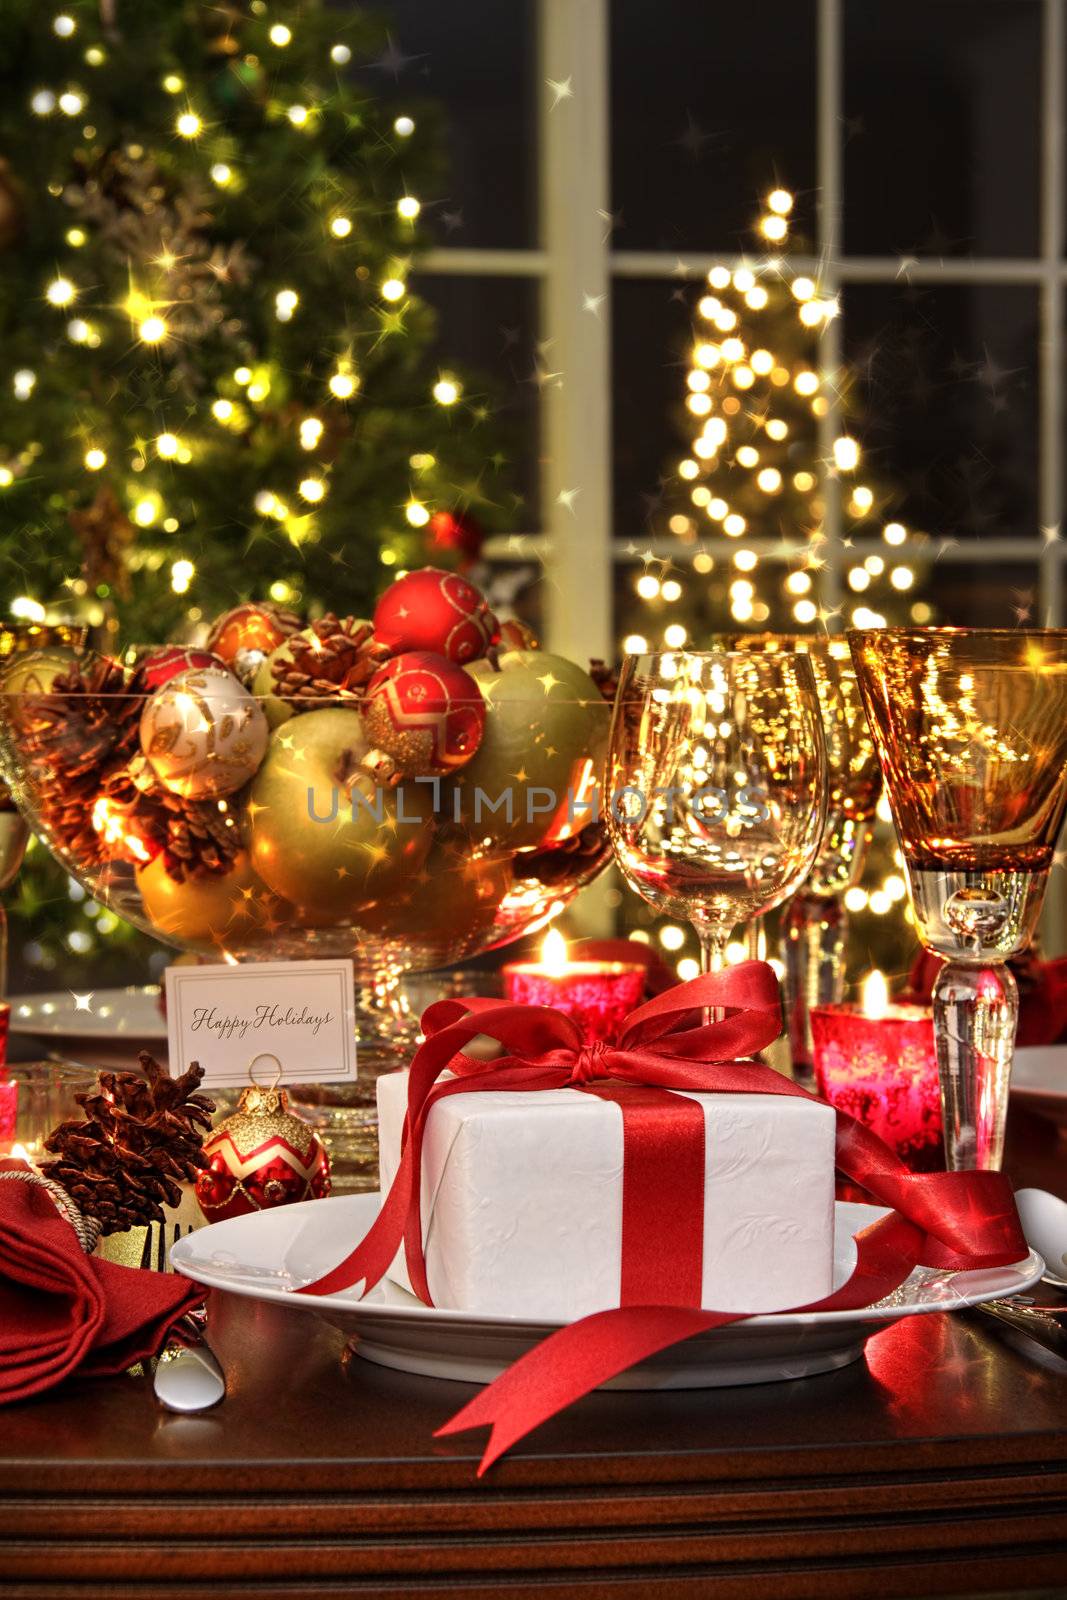 Festive table setting with red ribbon gift by Sandralise